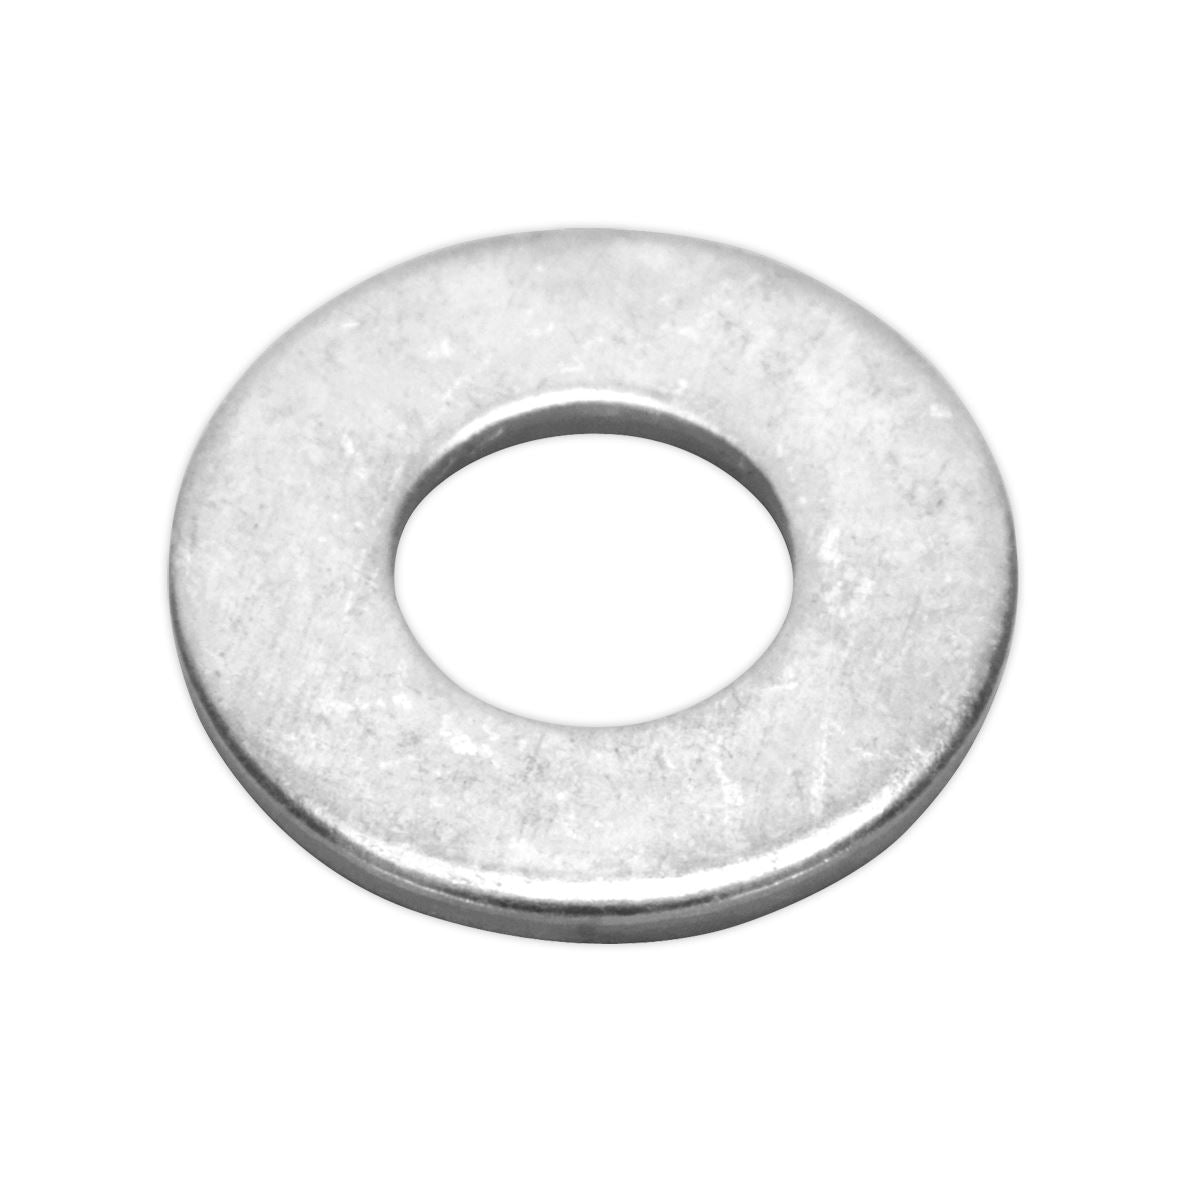 Sealey Flat Washer M6 x 14mm Form C Pack of 100